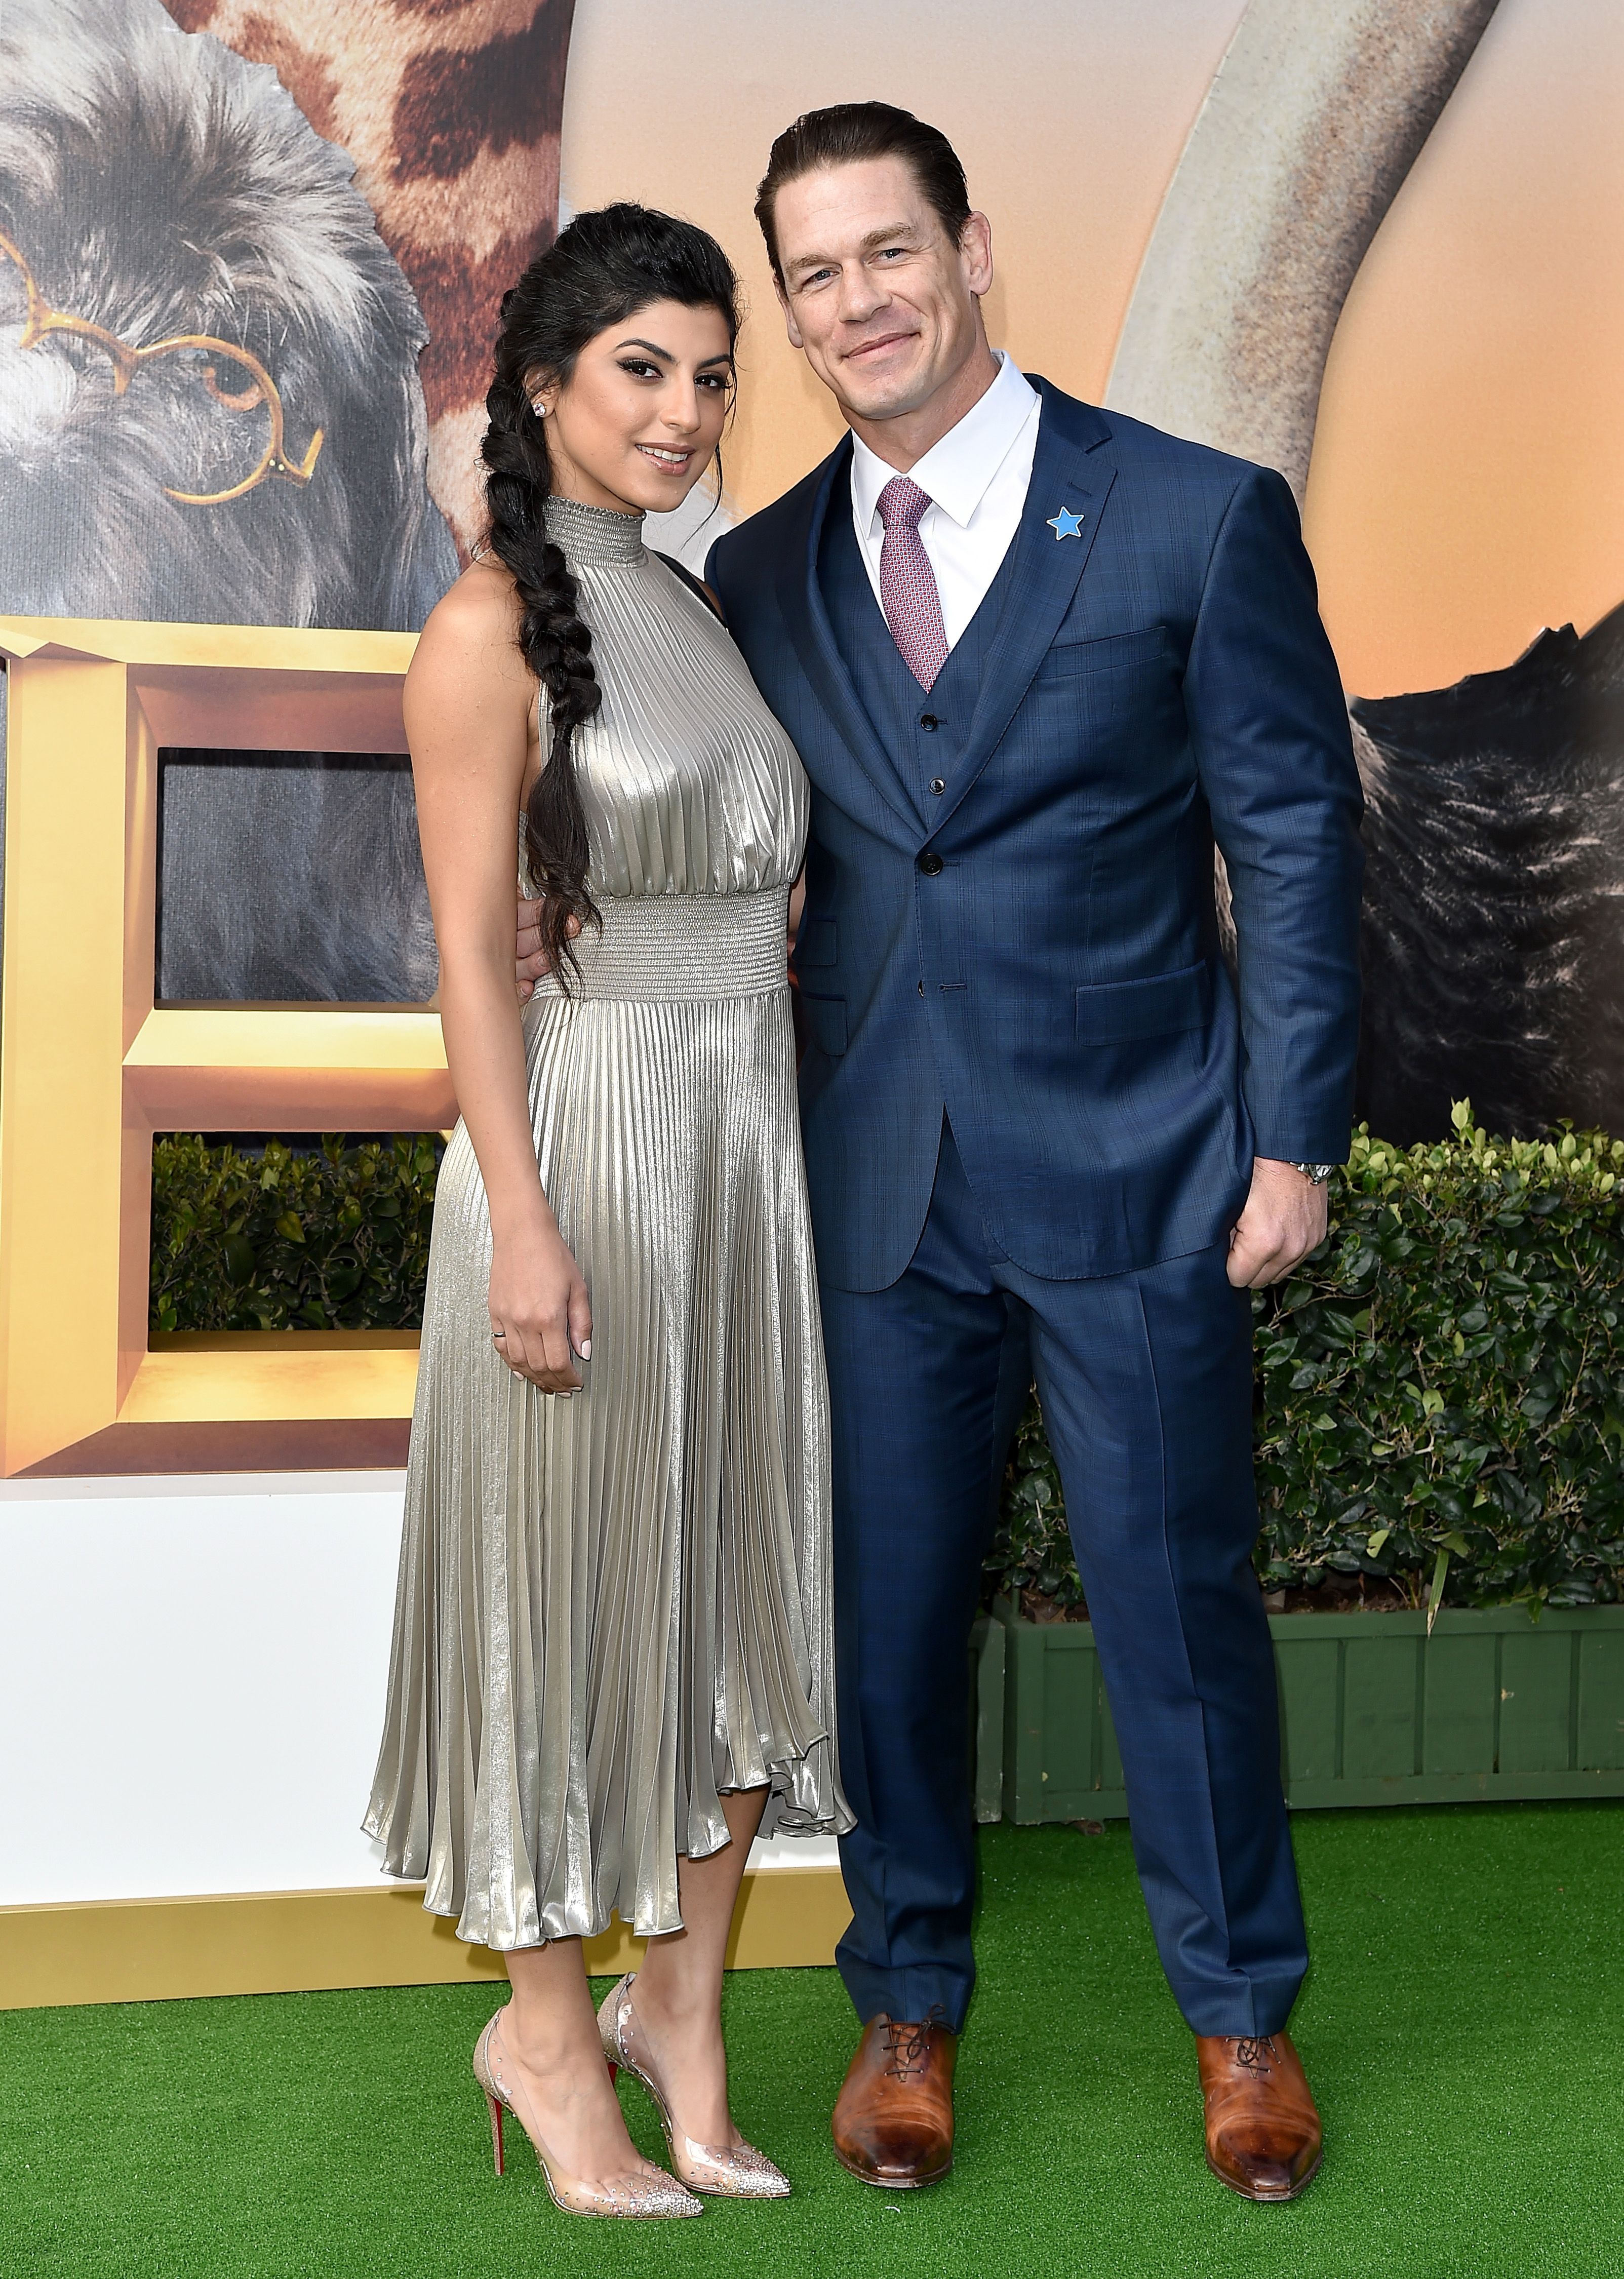 Shay Shariatzadeh and John Cena at the premiere of Universal Pictures' "Dolittle" at Regency Village Theatre on January 11, 2020 | Photo: Getty Images